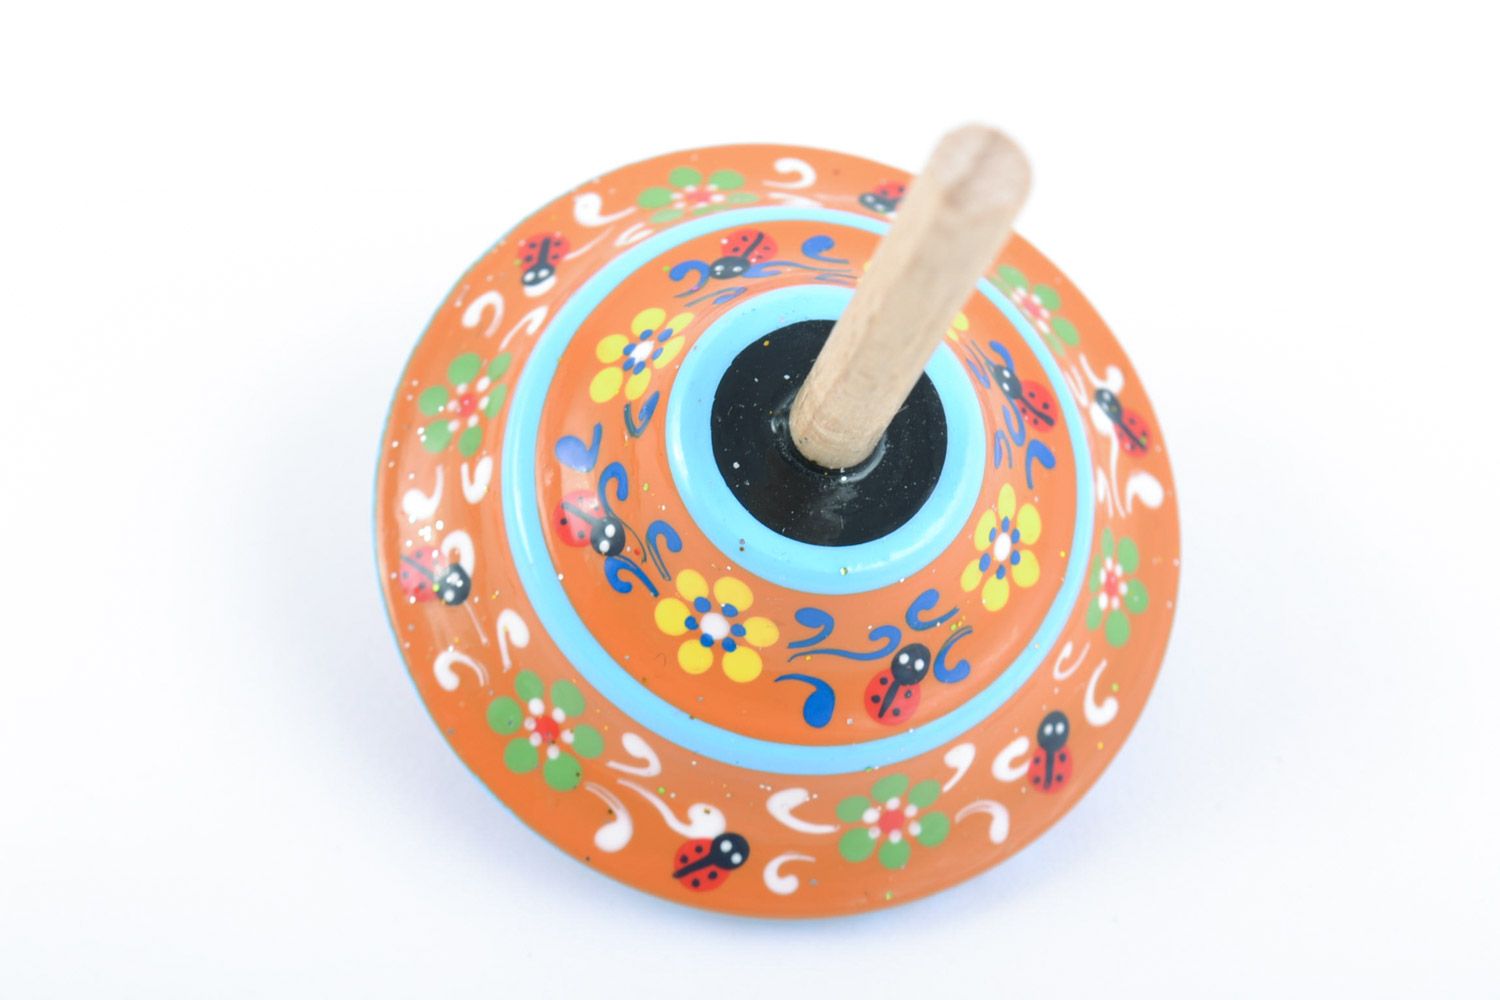 Homemade wooden educational toy spinning top for development of fine motor skills photo 4